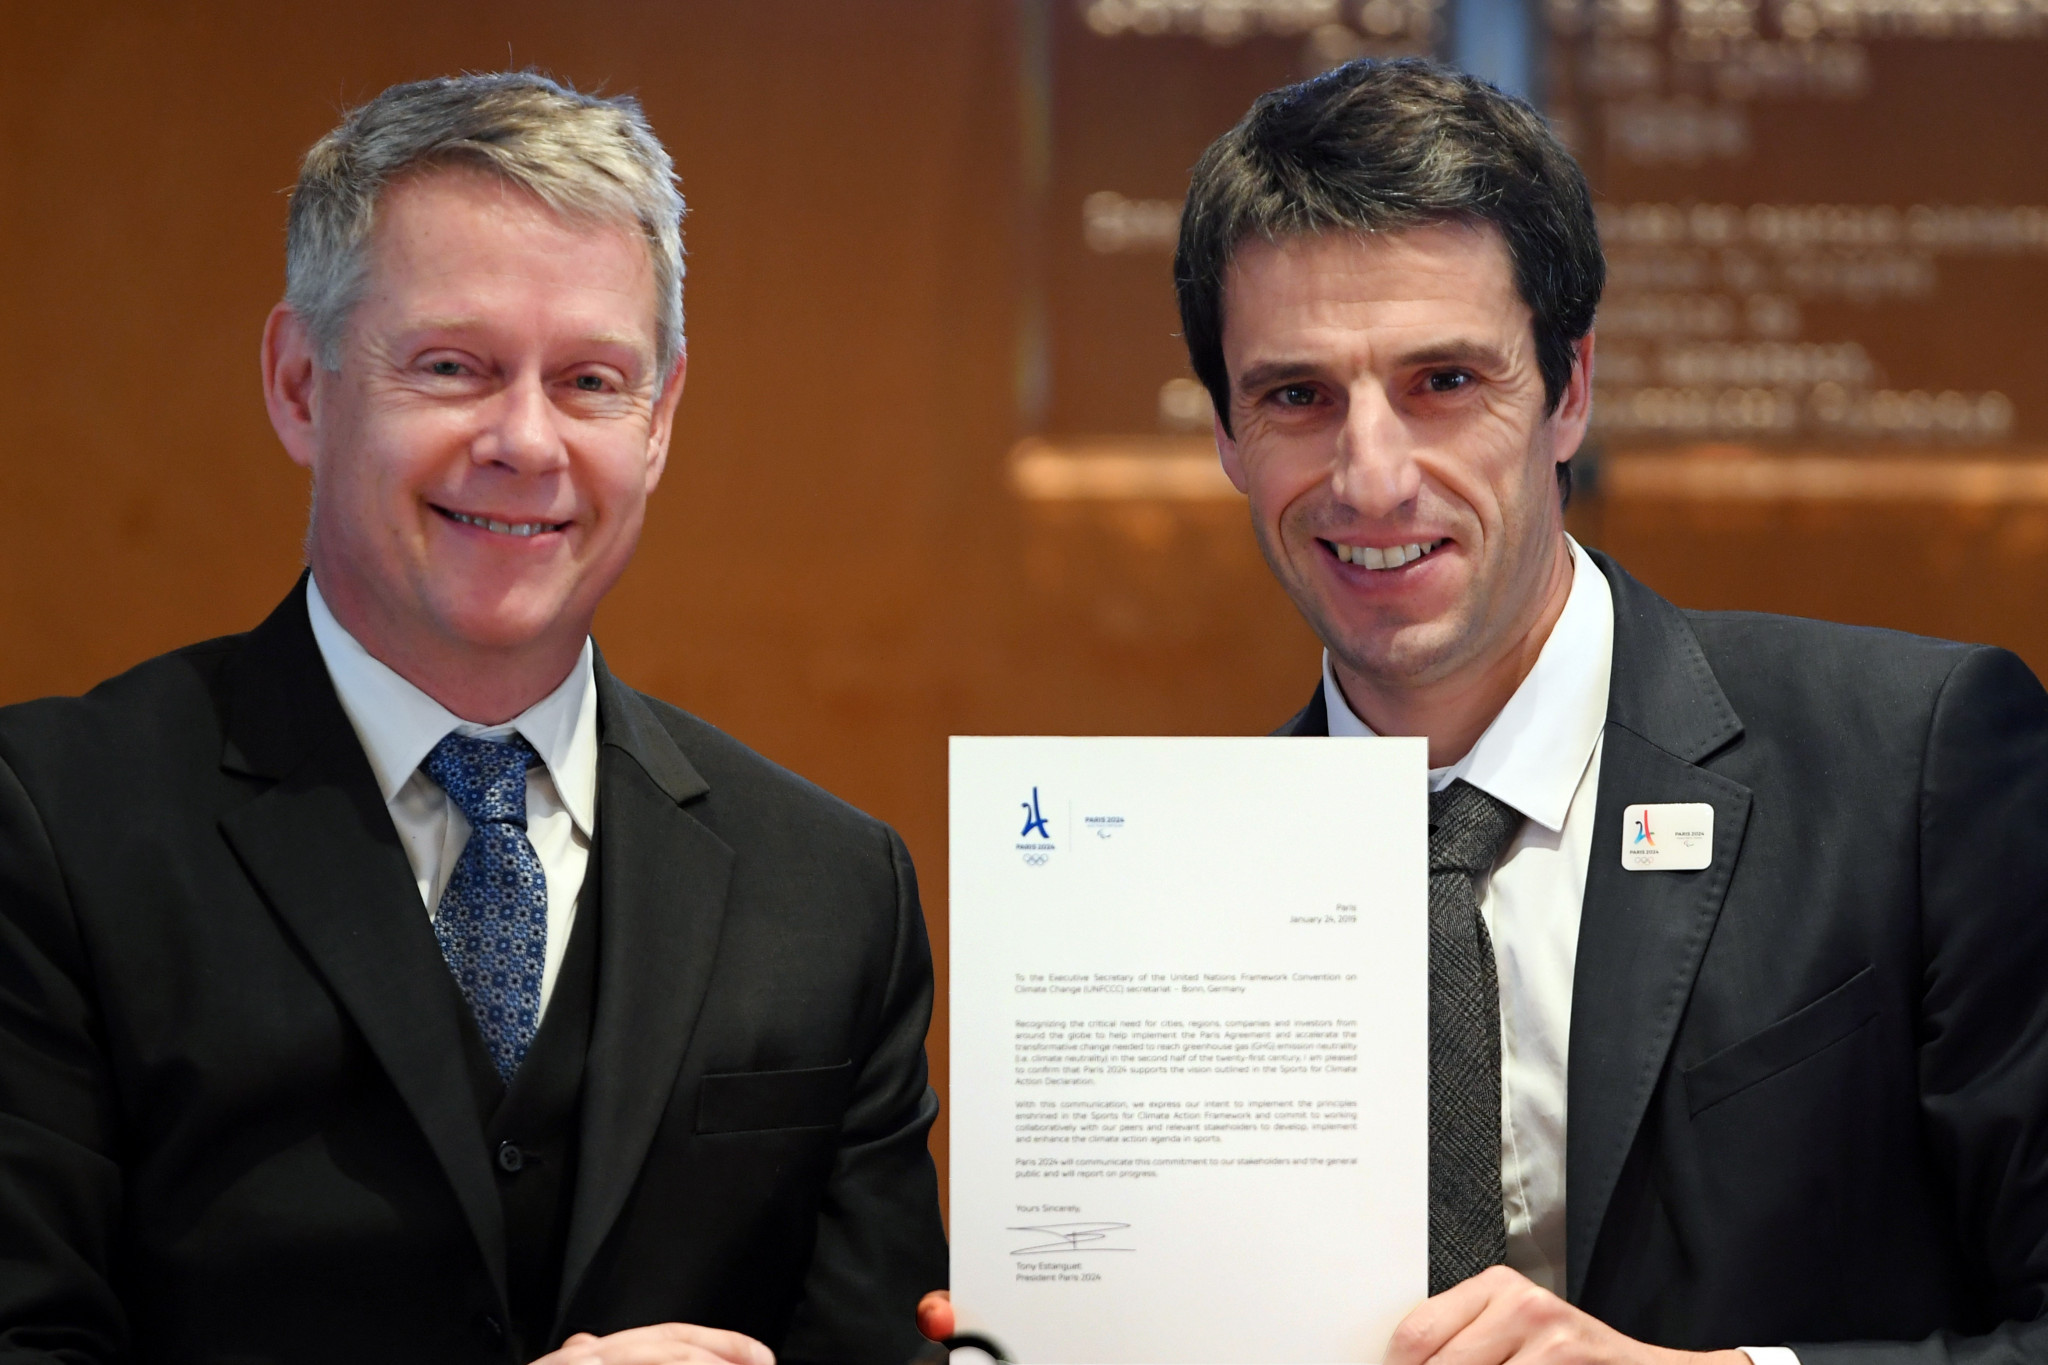 Paris 2024 President Tony Estanguet signed confirmed they would participate in a Sport for Climate Action initiative after meeting Niclas Svenningsen, manager of Global Climate Action ©Paris 2024